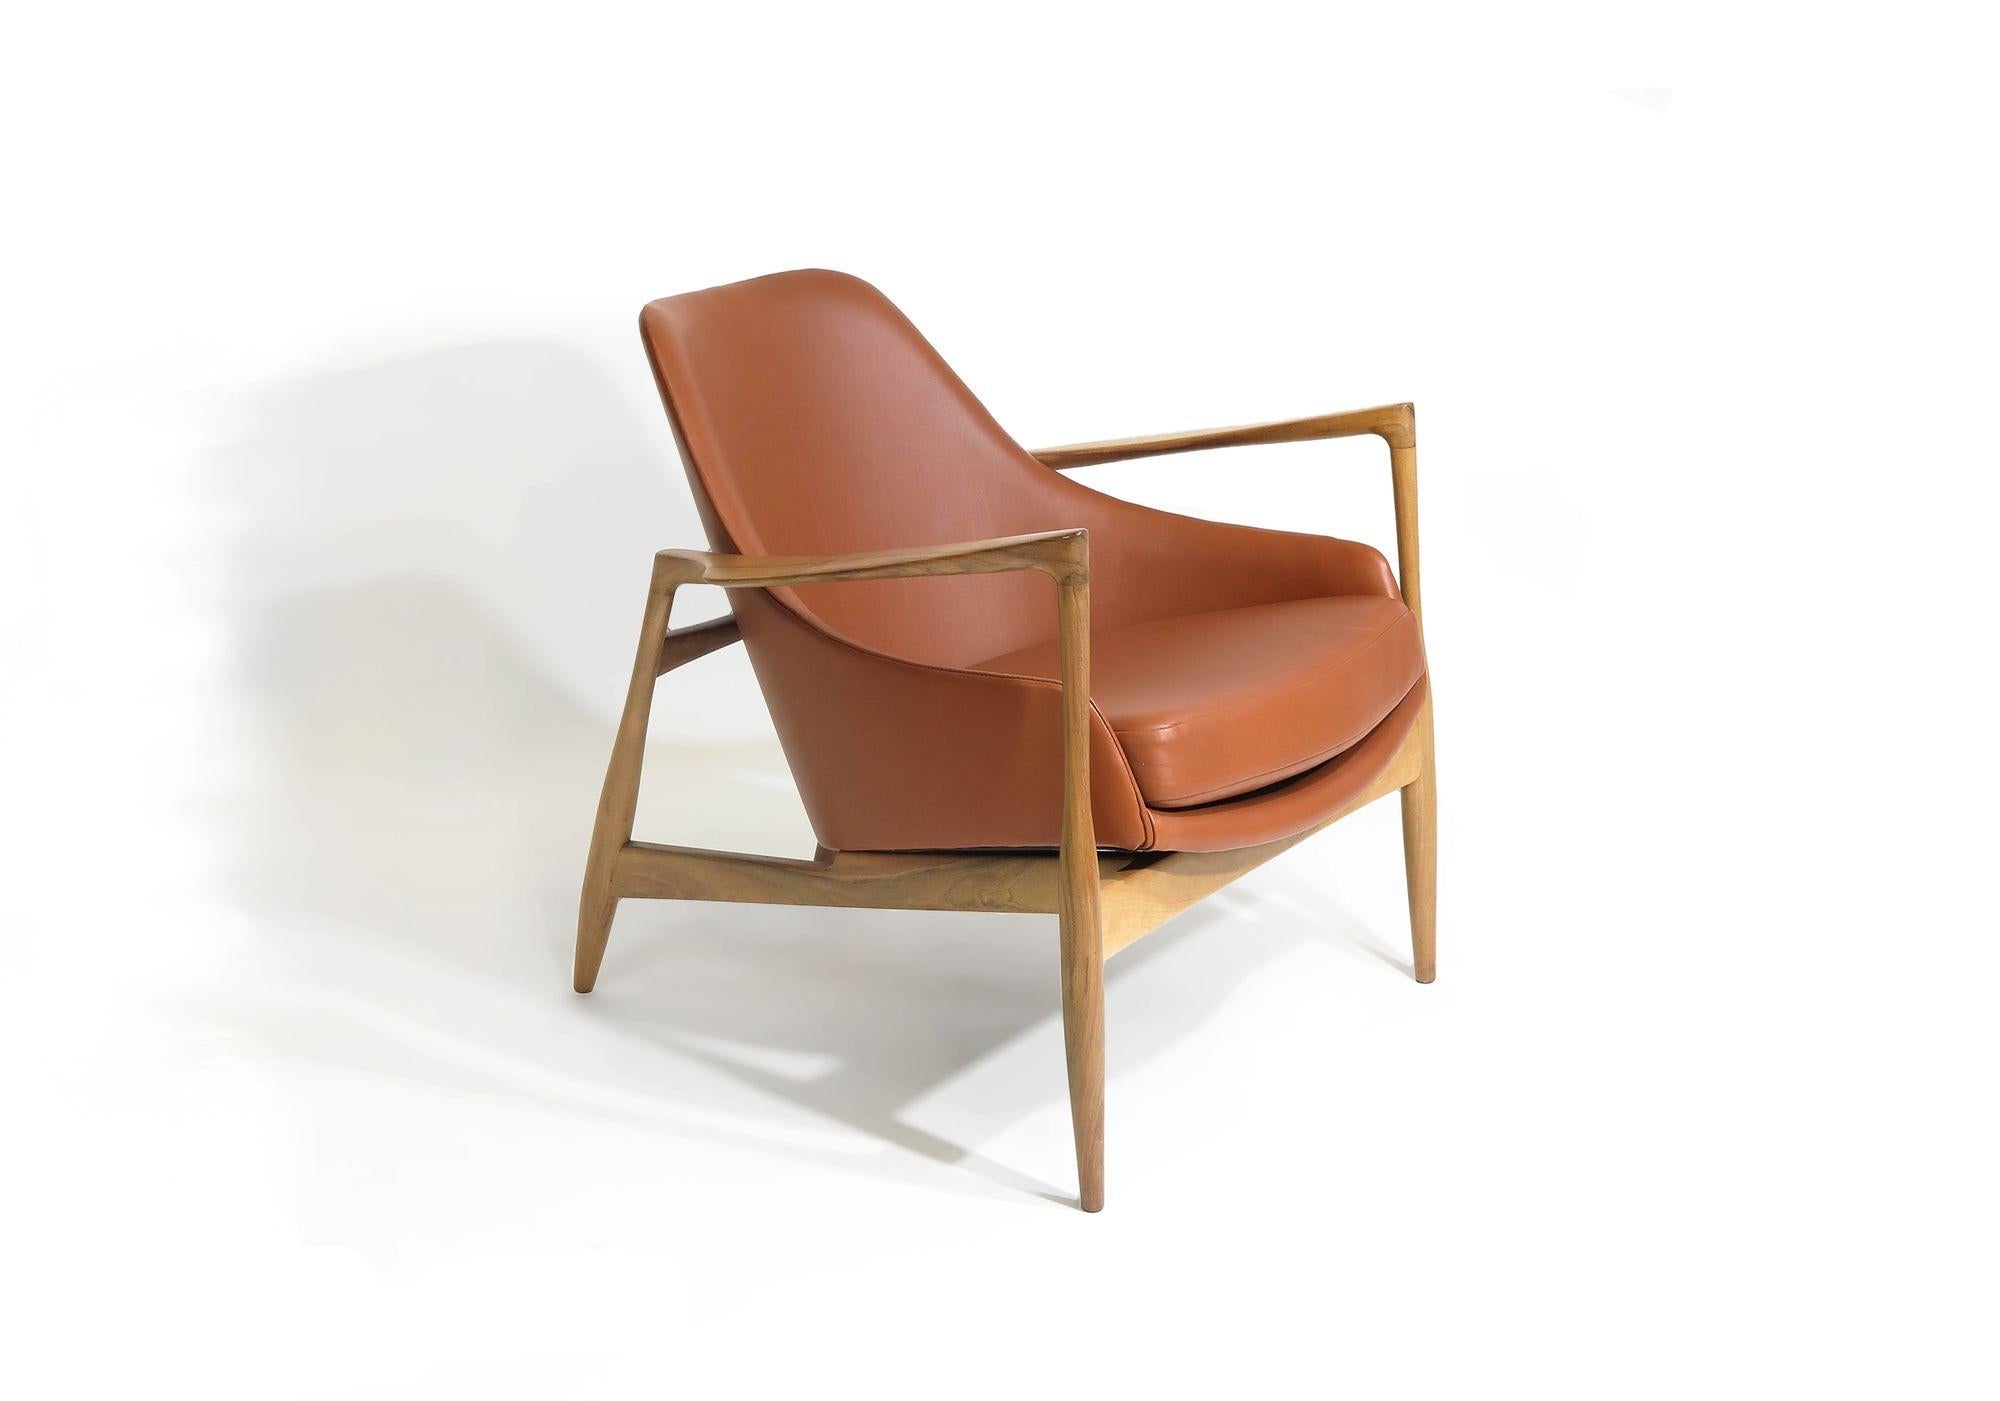 Rare Danish lounge chair designed by IB Kofod Larsen for G. Laauser, 1955. Finely sculpted frame of nut wood with a steamed back structure, and inner spring seat, covered in new aniline saddle leather. Finely restored and in excellent